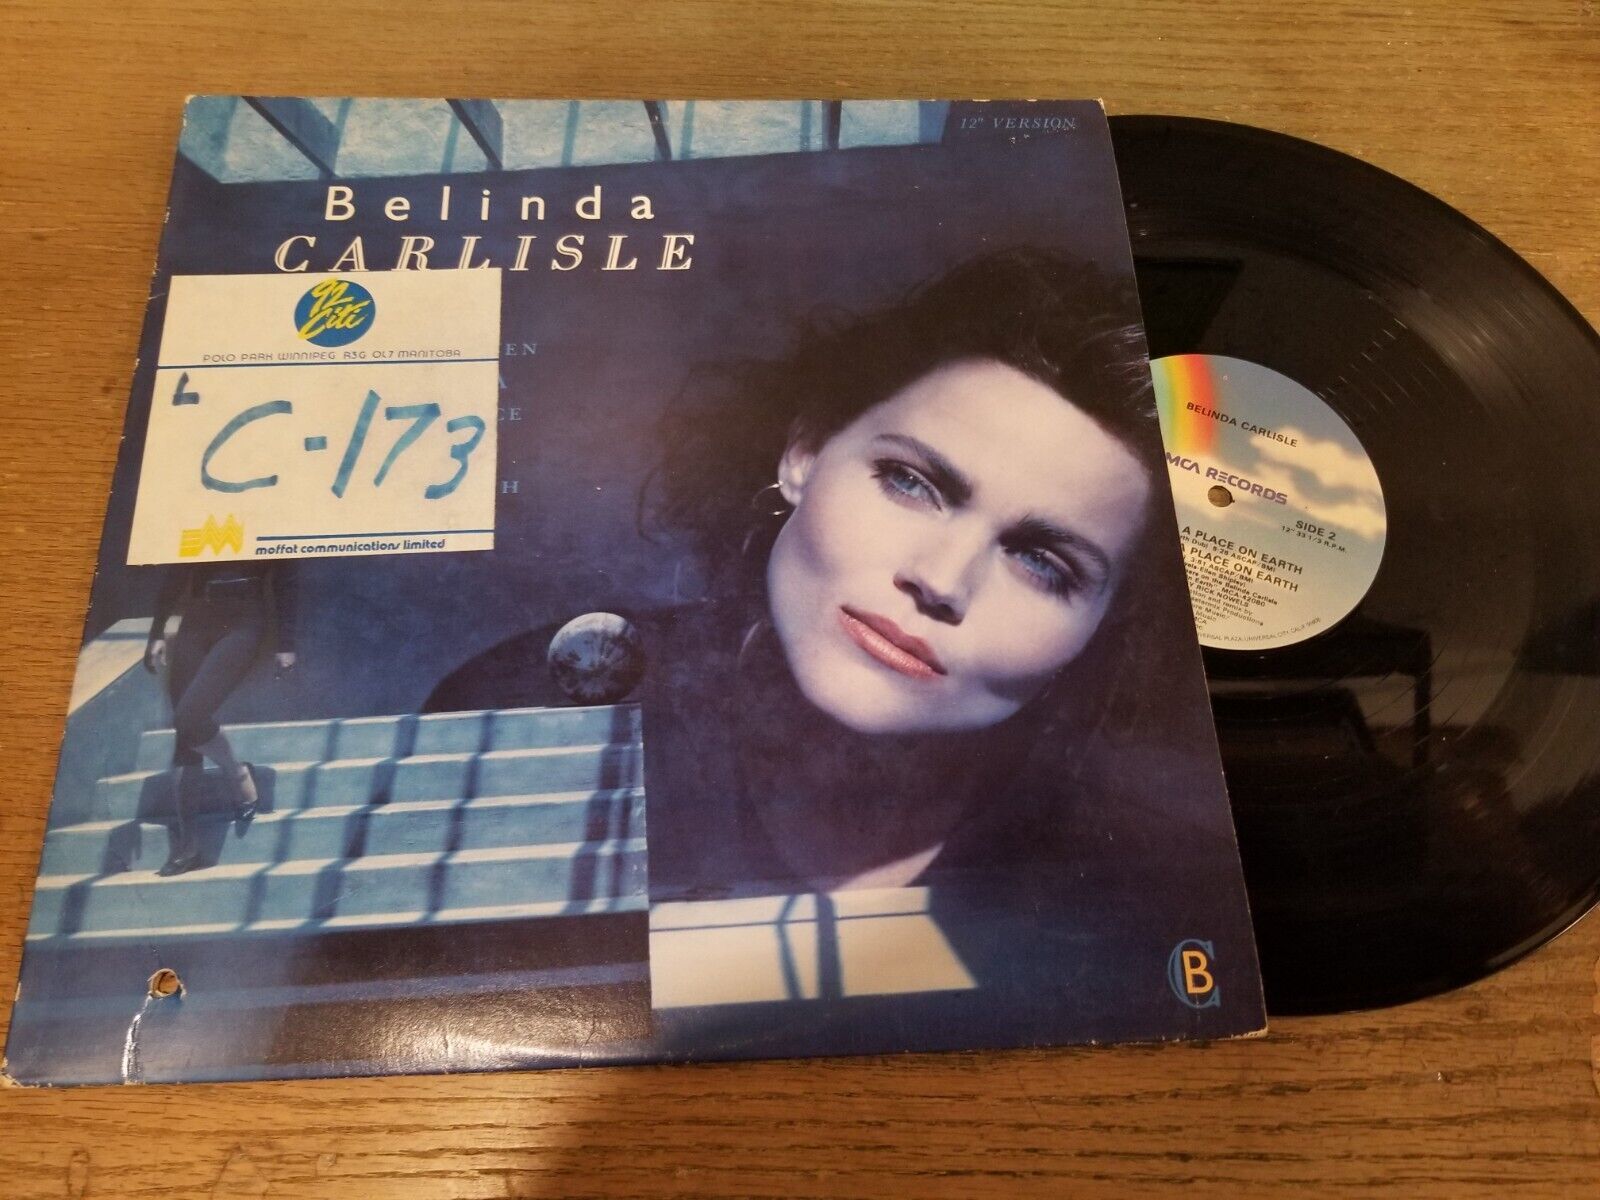 Primary image for Belinda Carlisle - Heaven Is A Place On Earth  - 12 inch Single   EX G+